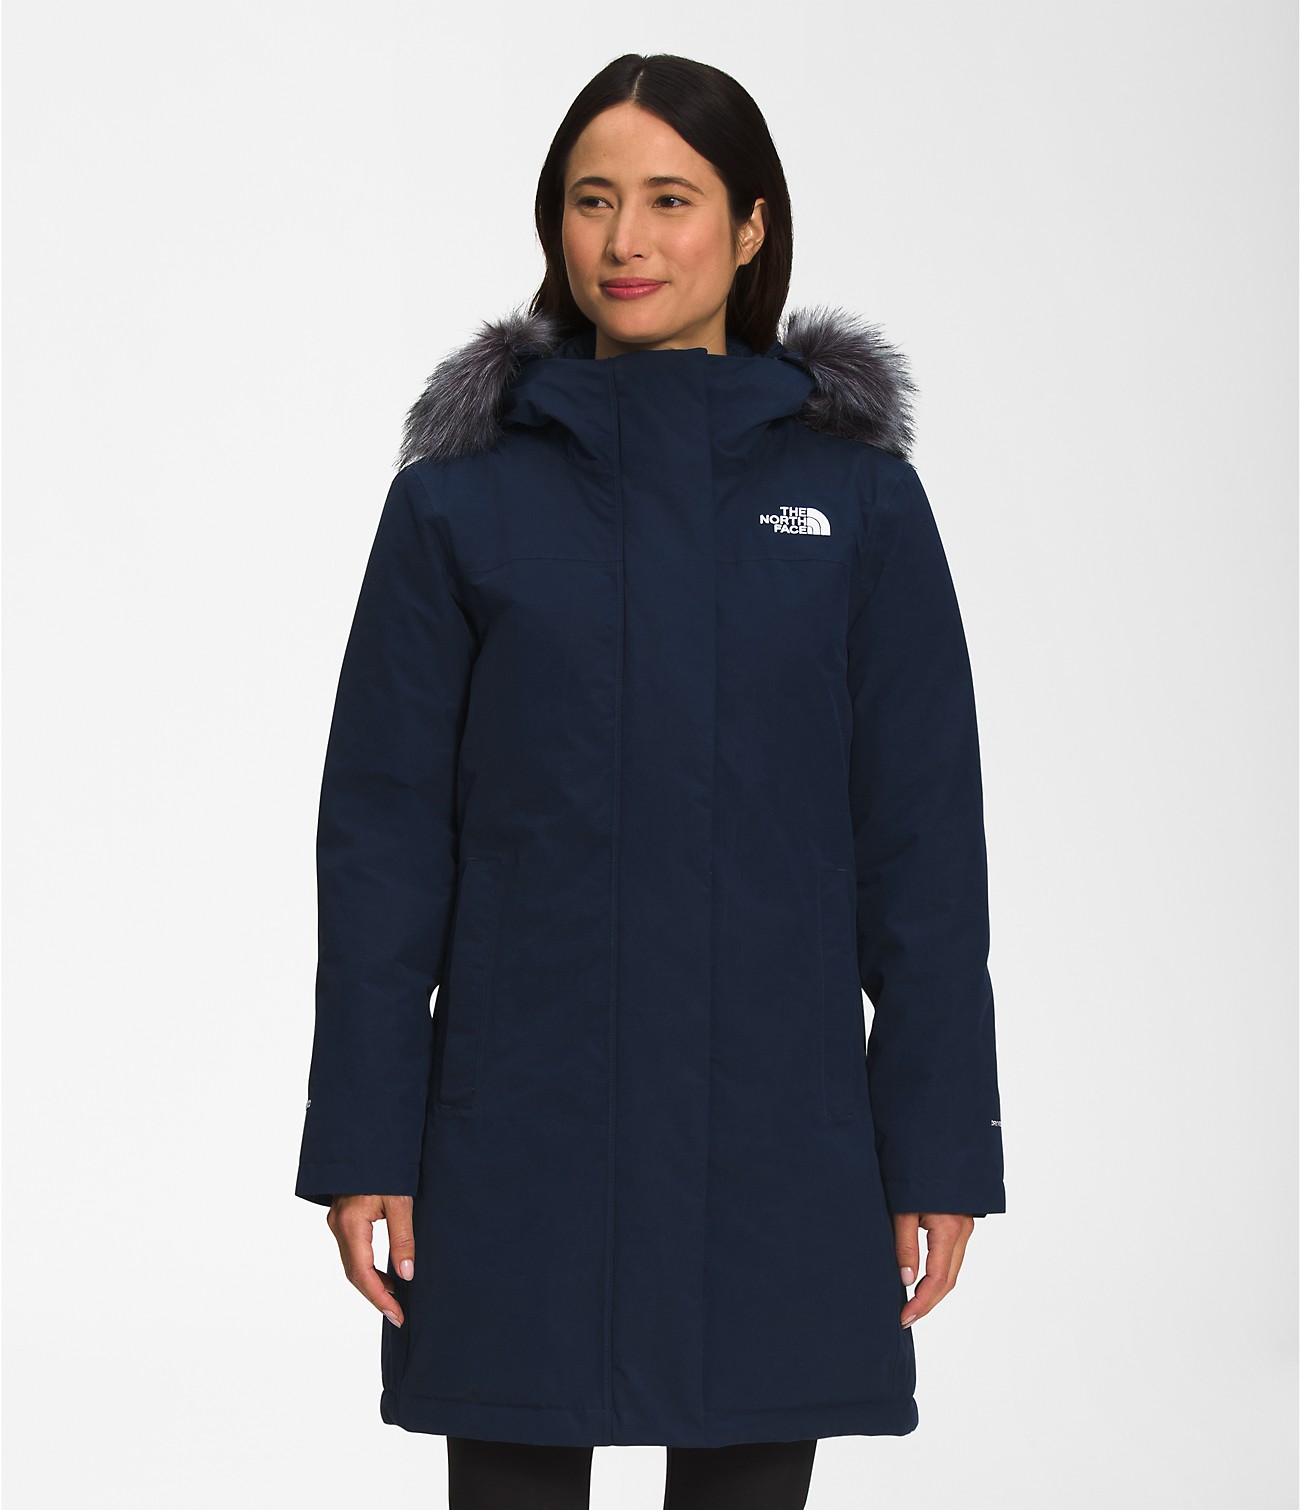 Unlock Wilderness' choice in the Rab Vs North Face comparison, the Arctic Parka by The North Face